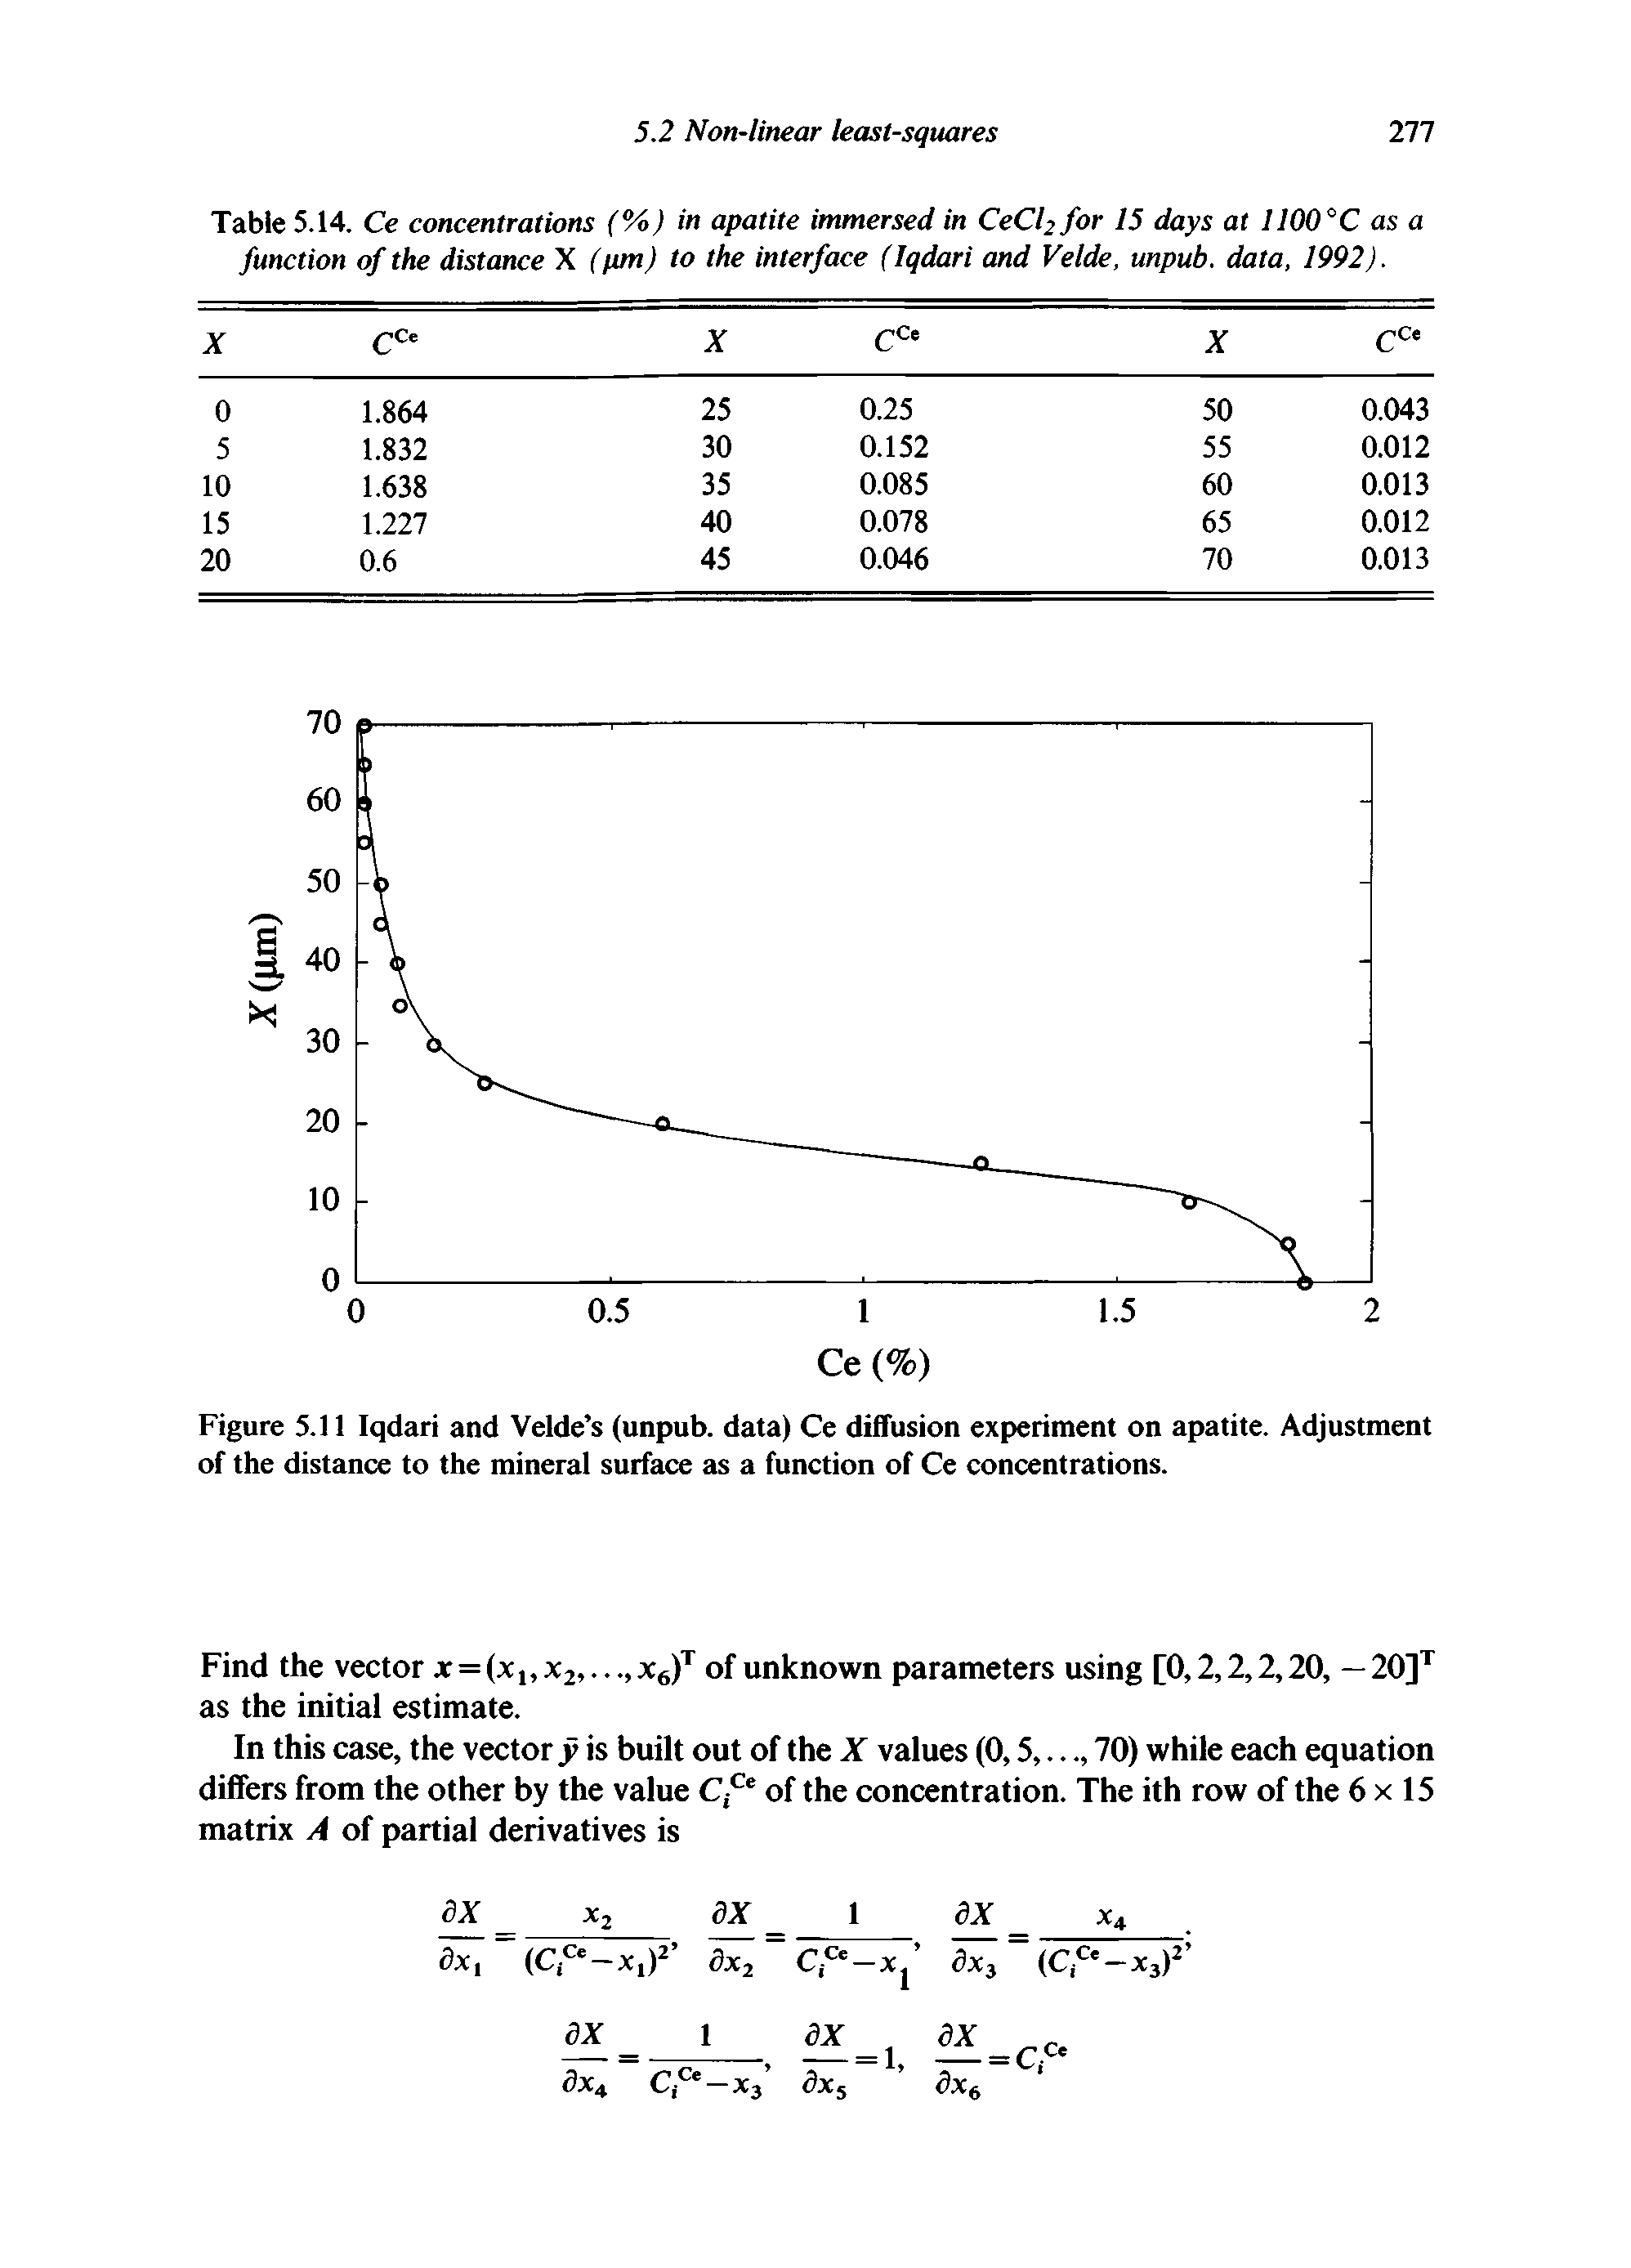 Figure 5.11 Iqdari and Velde s (unpub. data) Ce diffusion experiment on apatite. Adjustment of the distance to the mineral surface as a function of Ce concentrations.